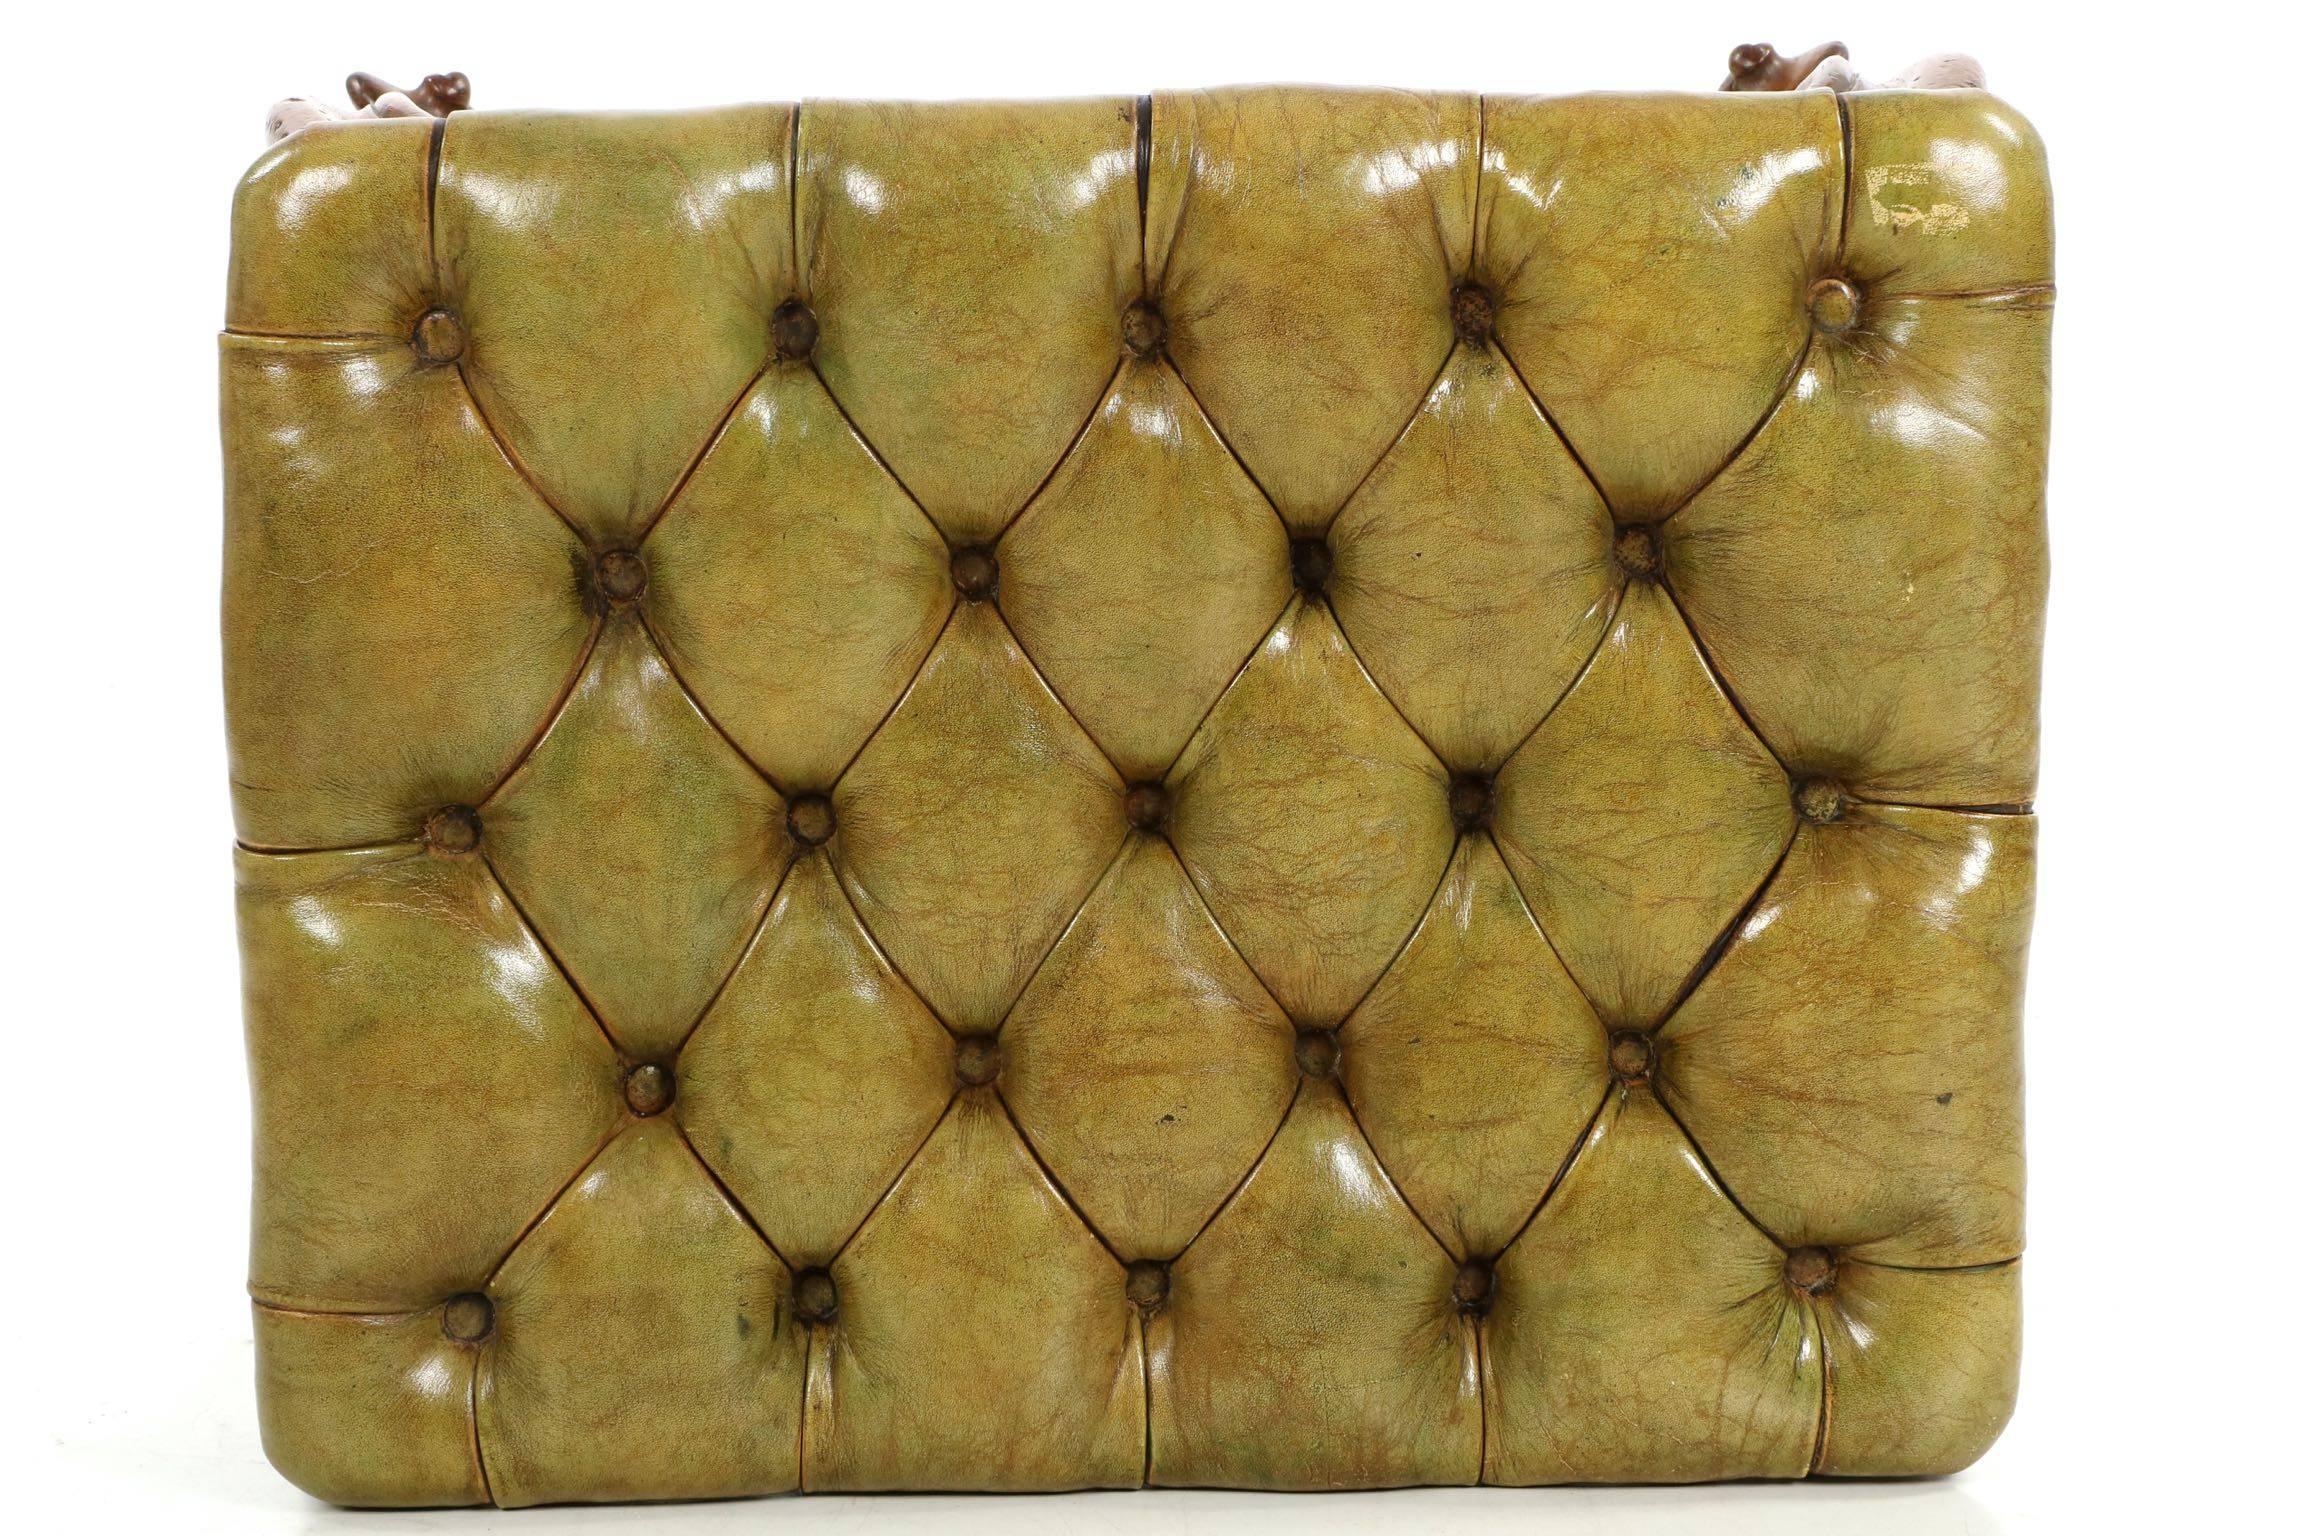 Carved French Rococo Green Tufted Leather Antique Footstool Ottoman